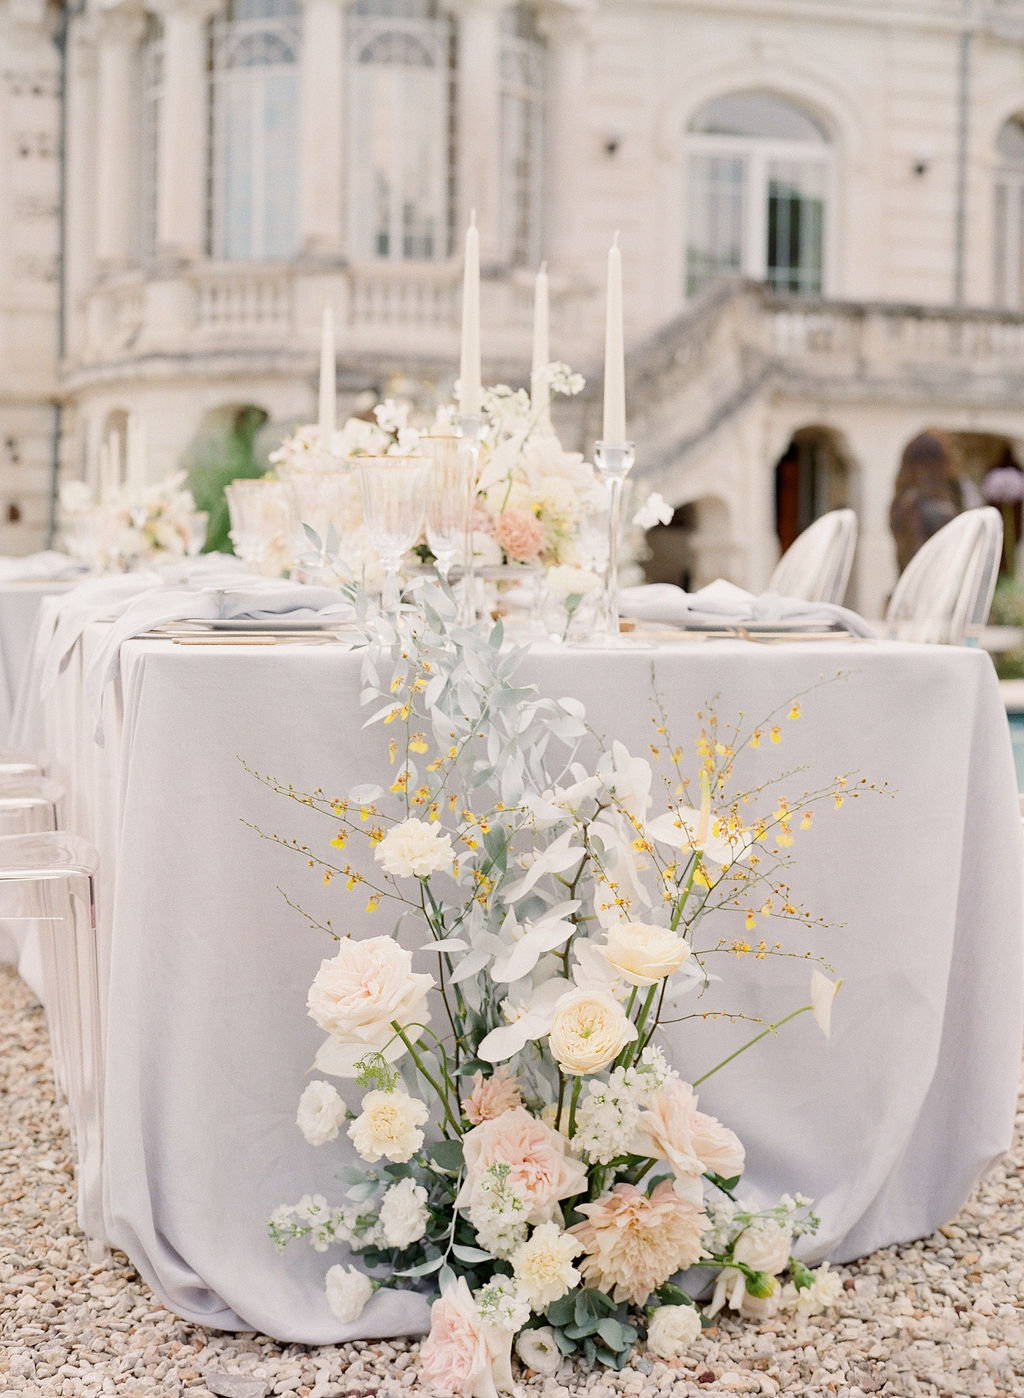 decoration table mariage fine art chateau mader